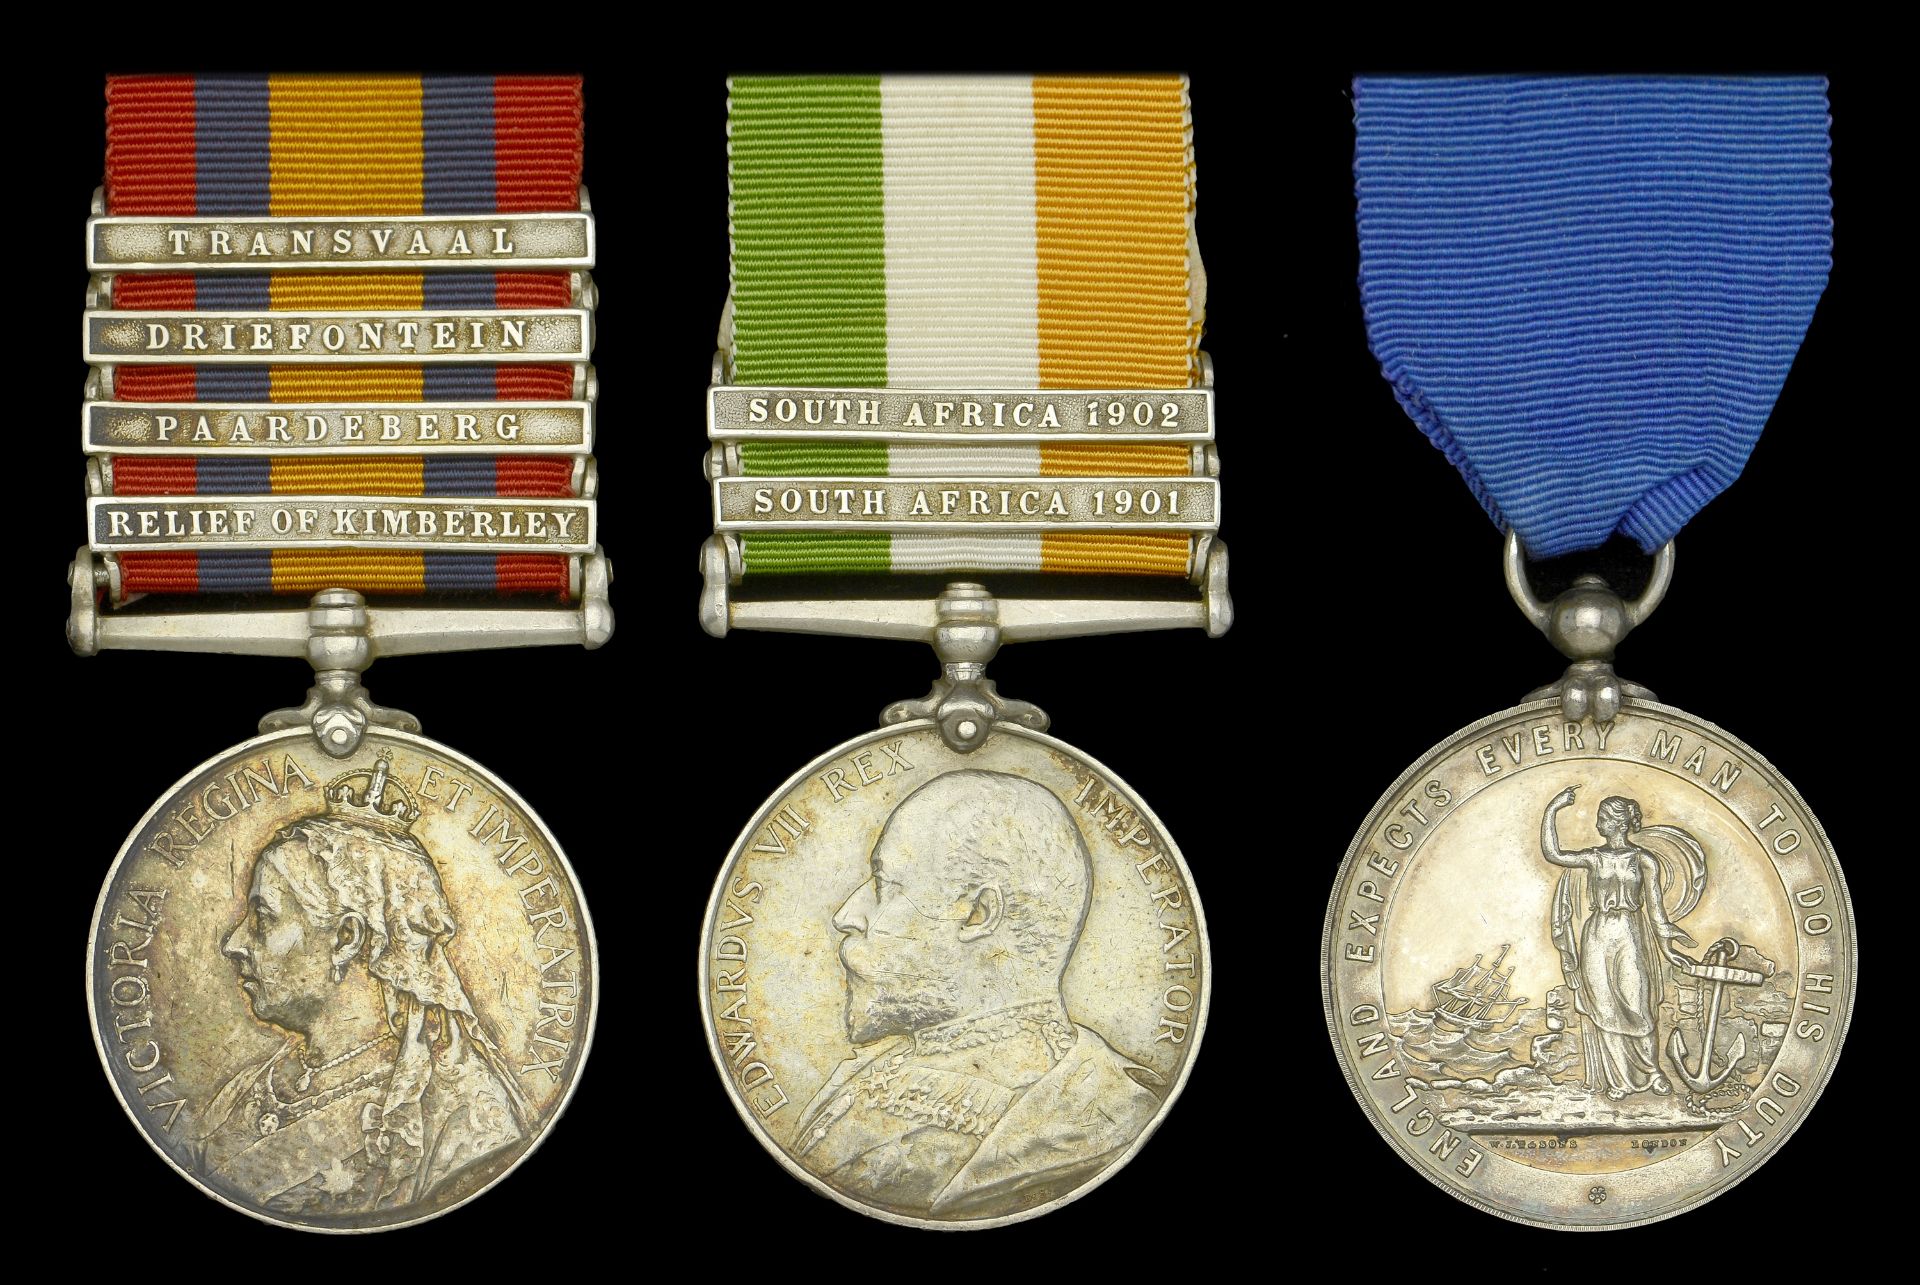 Medals from the Collection of the Soldiers of Oxfordshire Museum, Part 6